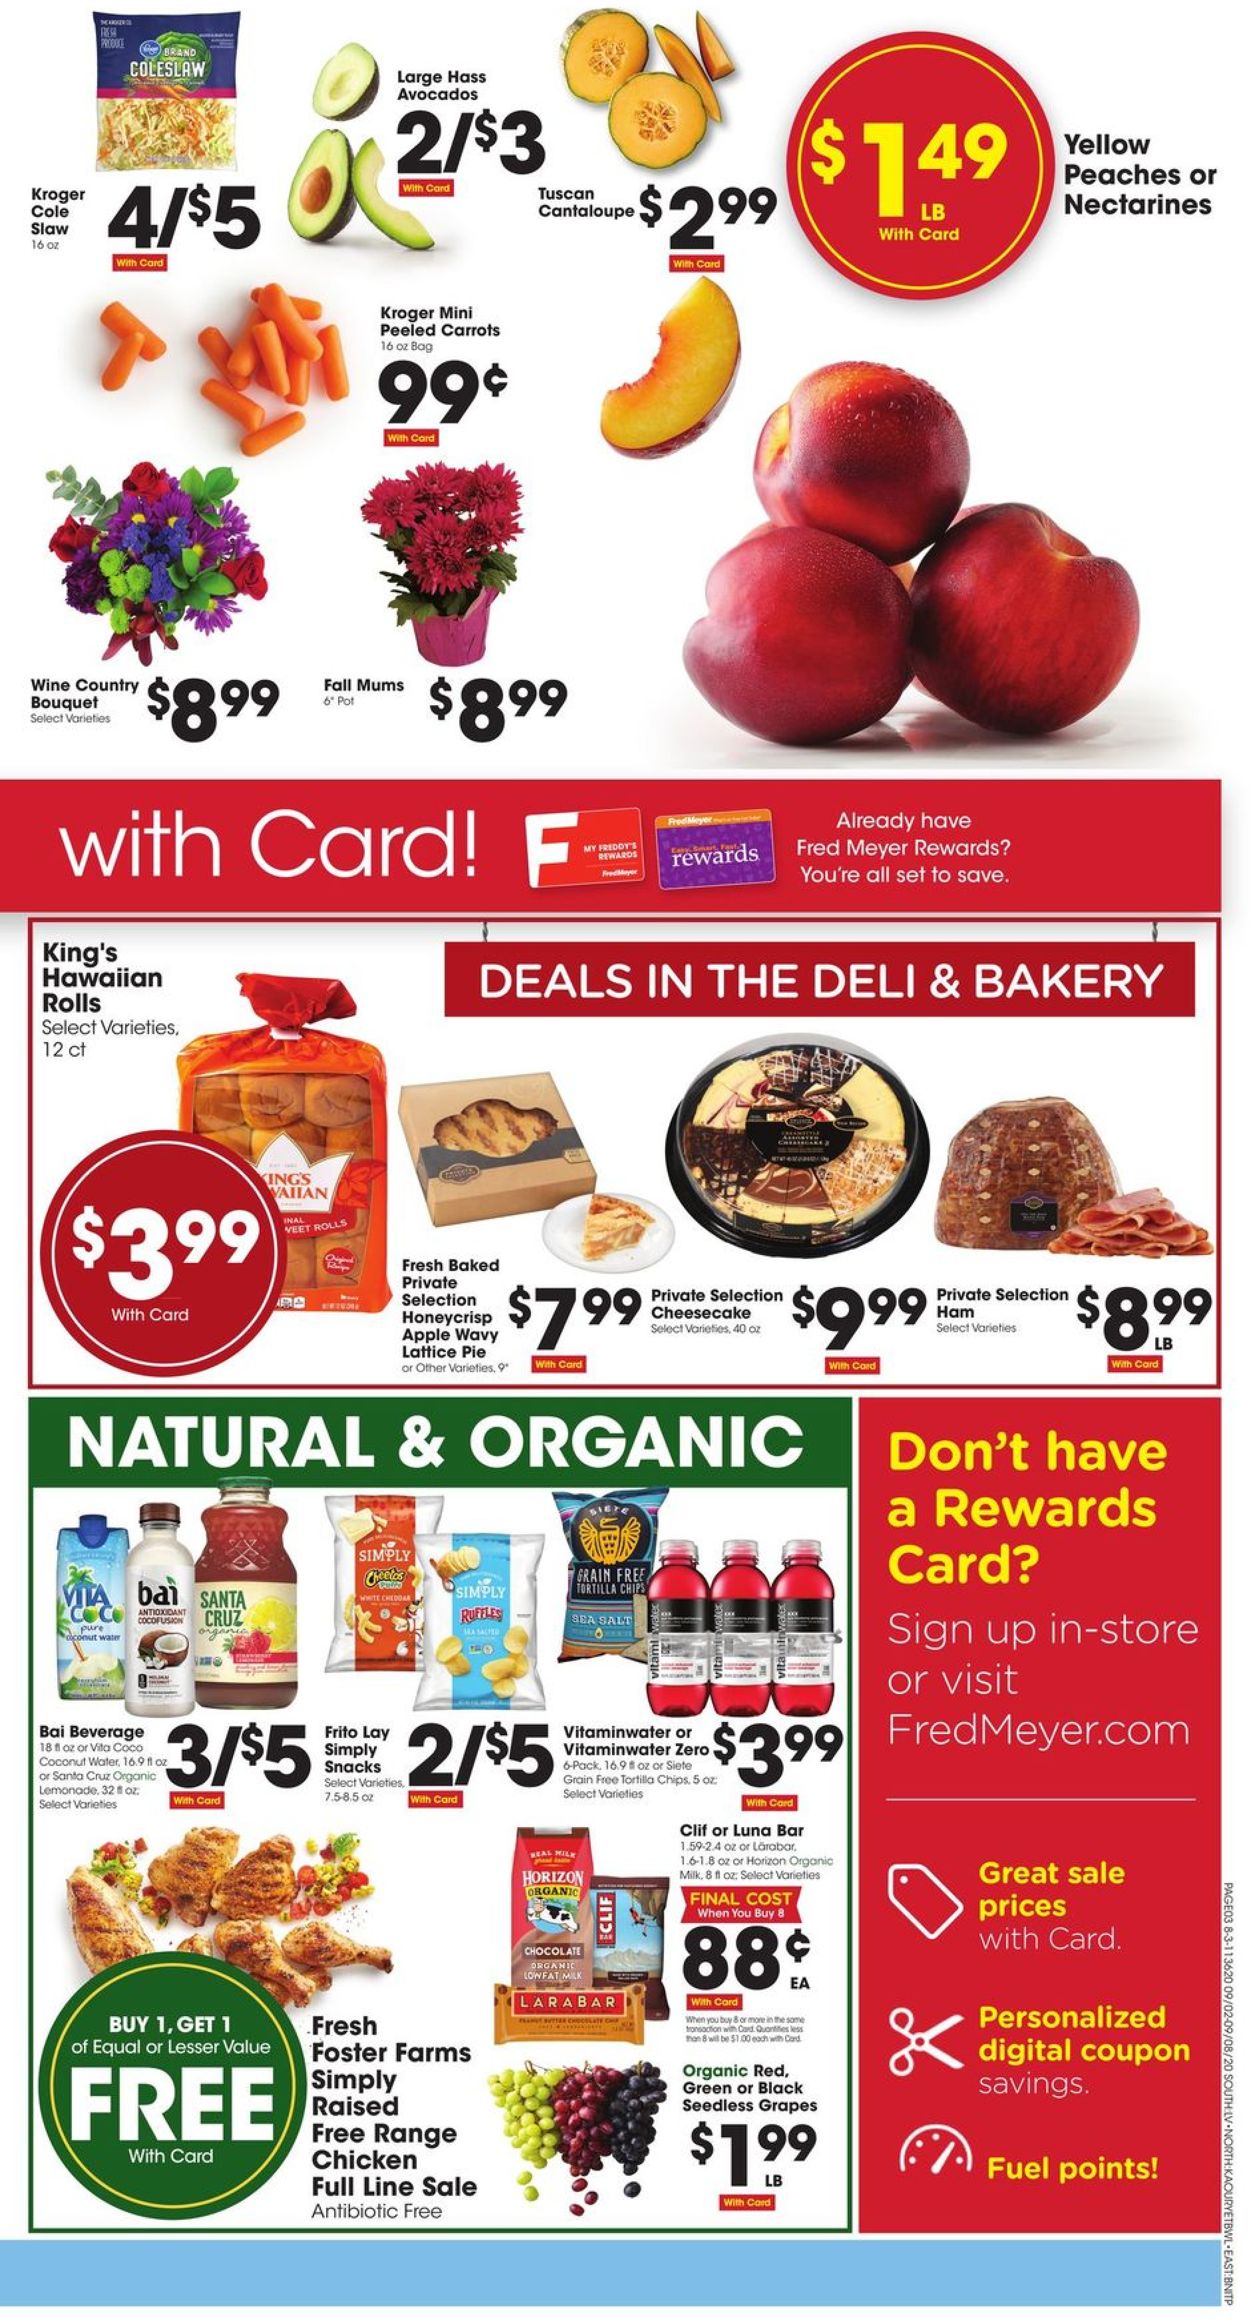 Fred Meyer Ad from 09/02/2020